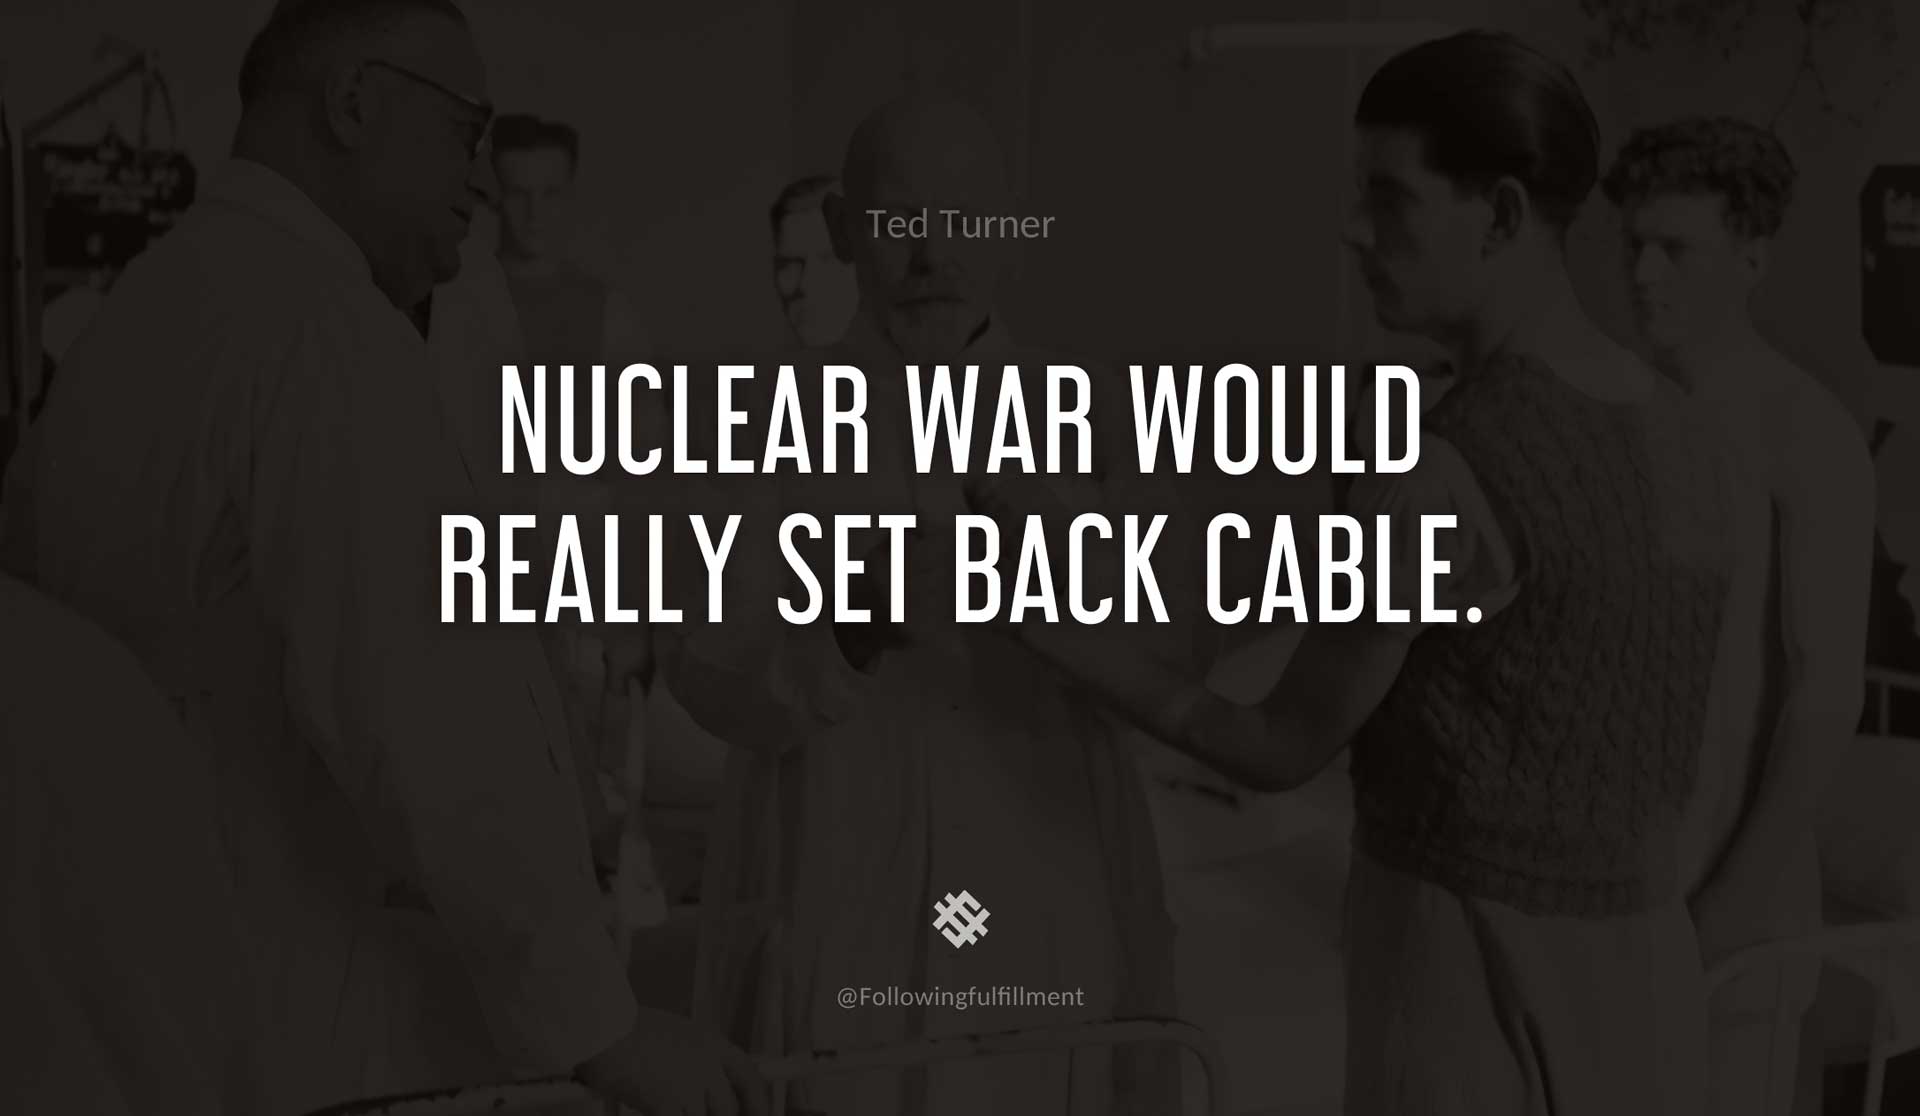 Nuclear-war-would-really-set-back-cable.-TED-TURNER-Quote.jpg